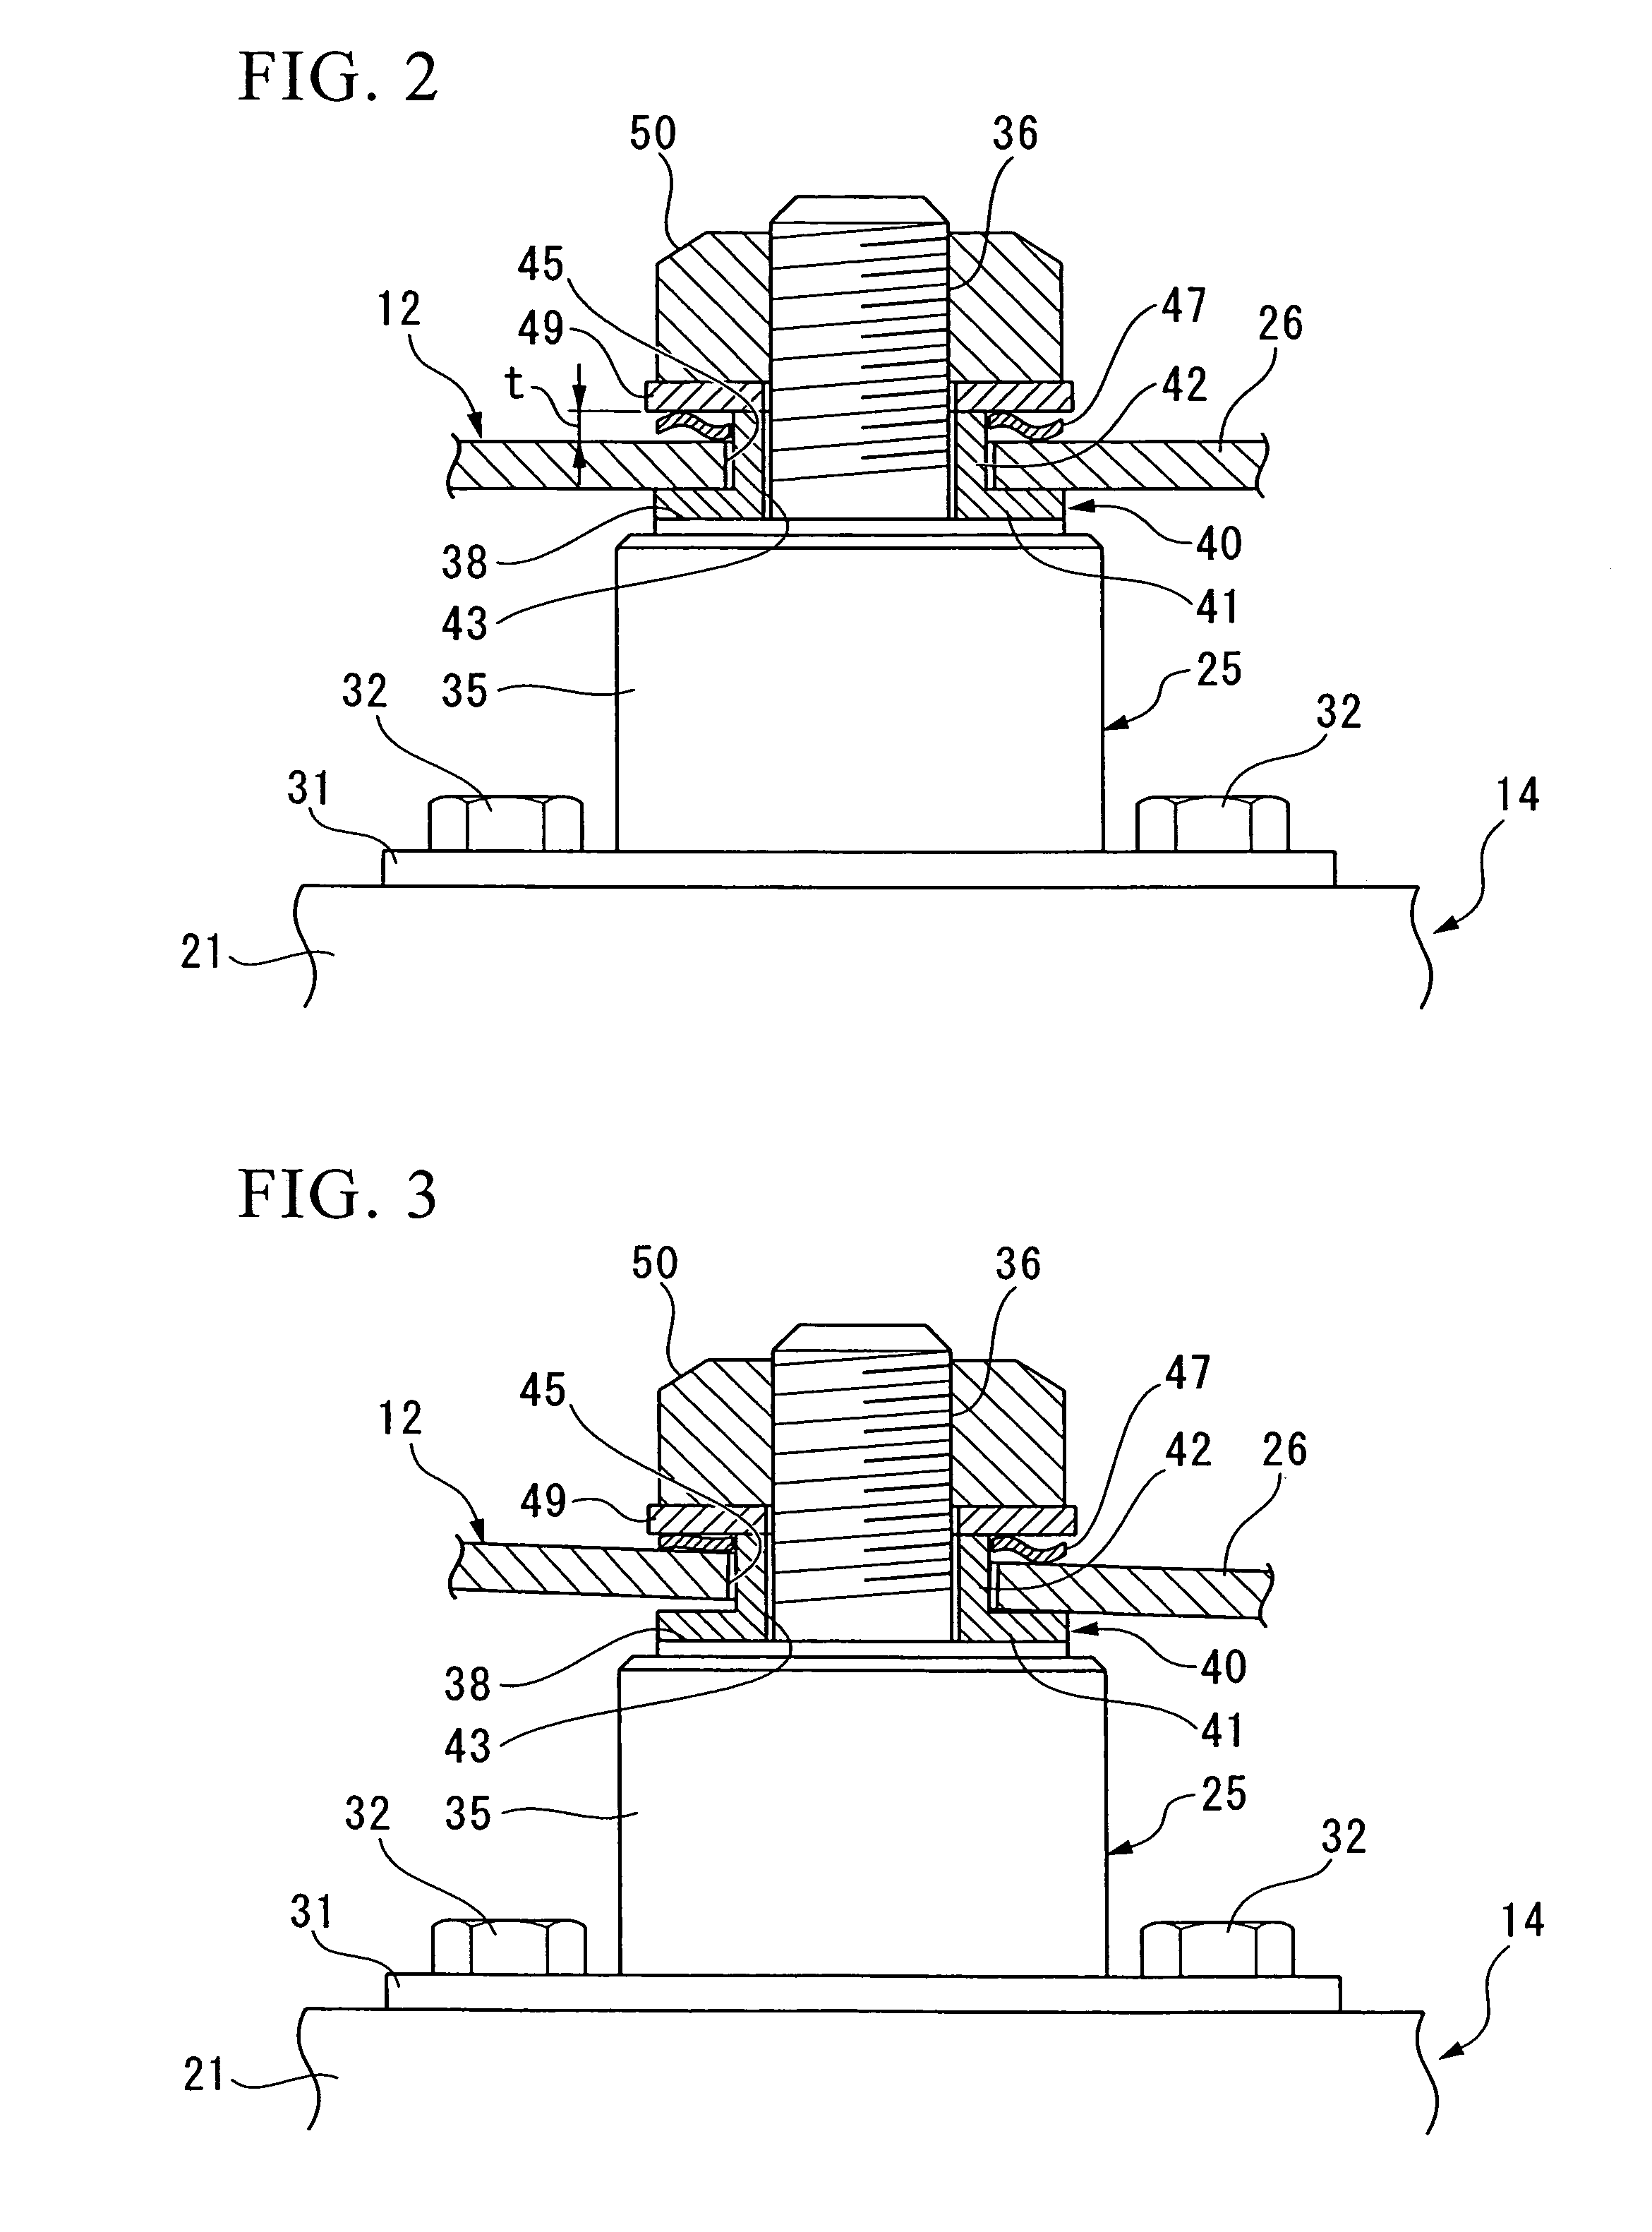 Load cell attachment structure